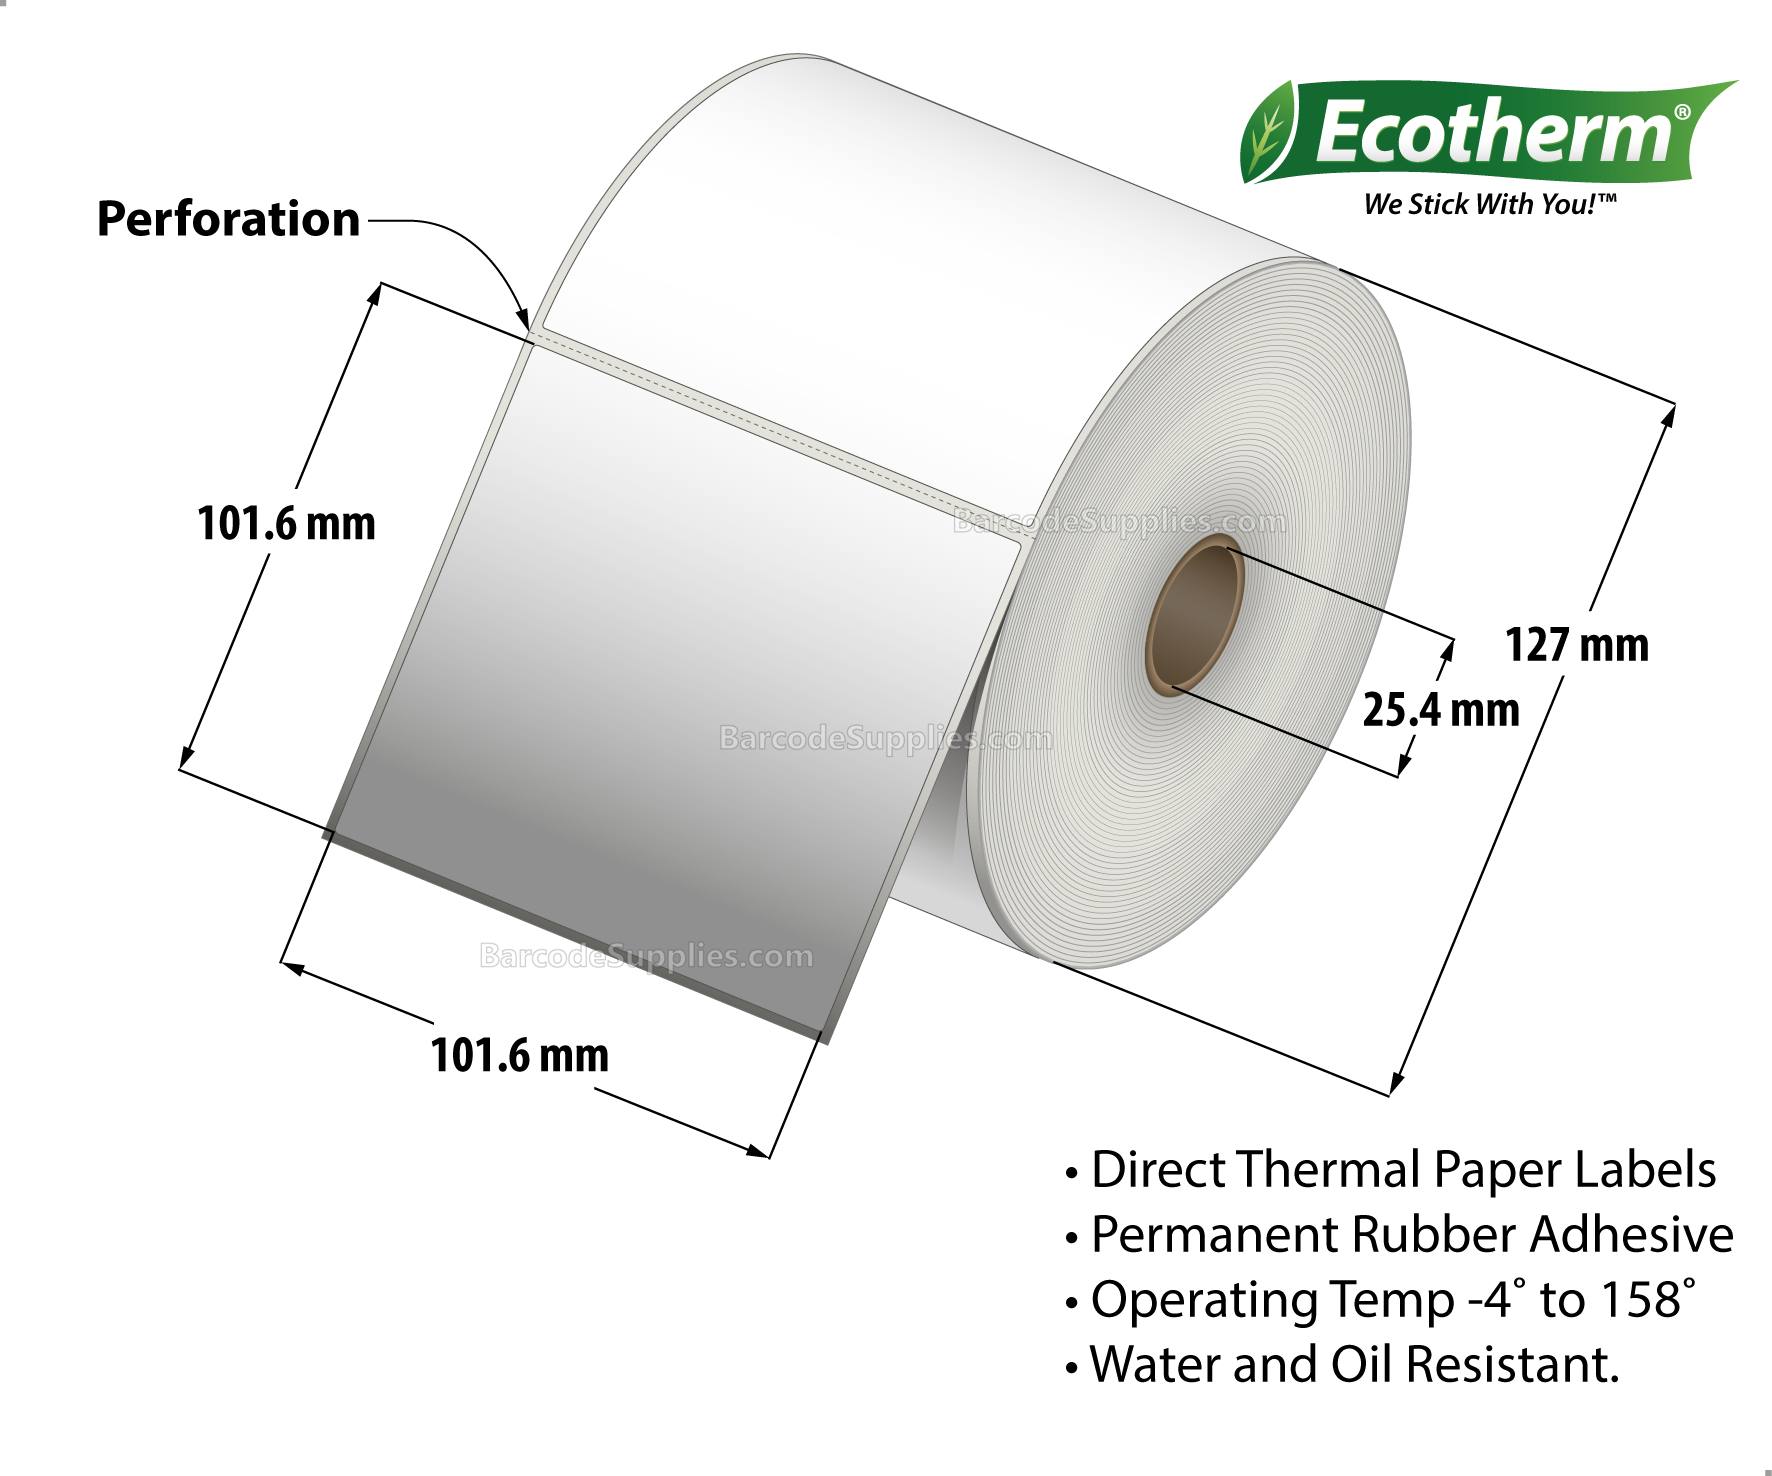 4 x 4 Direct Thermal White Labels With Rubber Adhesive - Perforated - 700 Labels Per Roll - Carton Of 6 Rolls - 4200 Labels Total - MPN: ECOTHERM15152-6